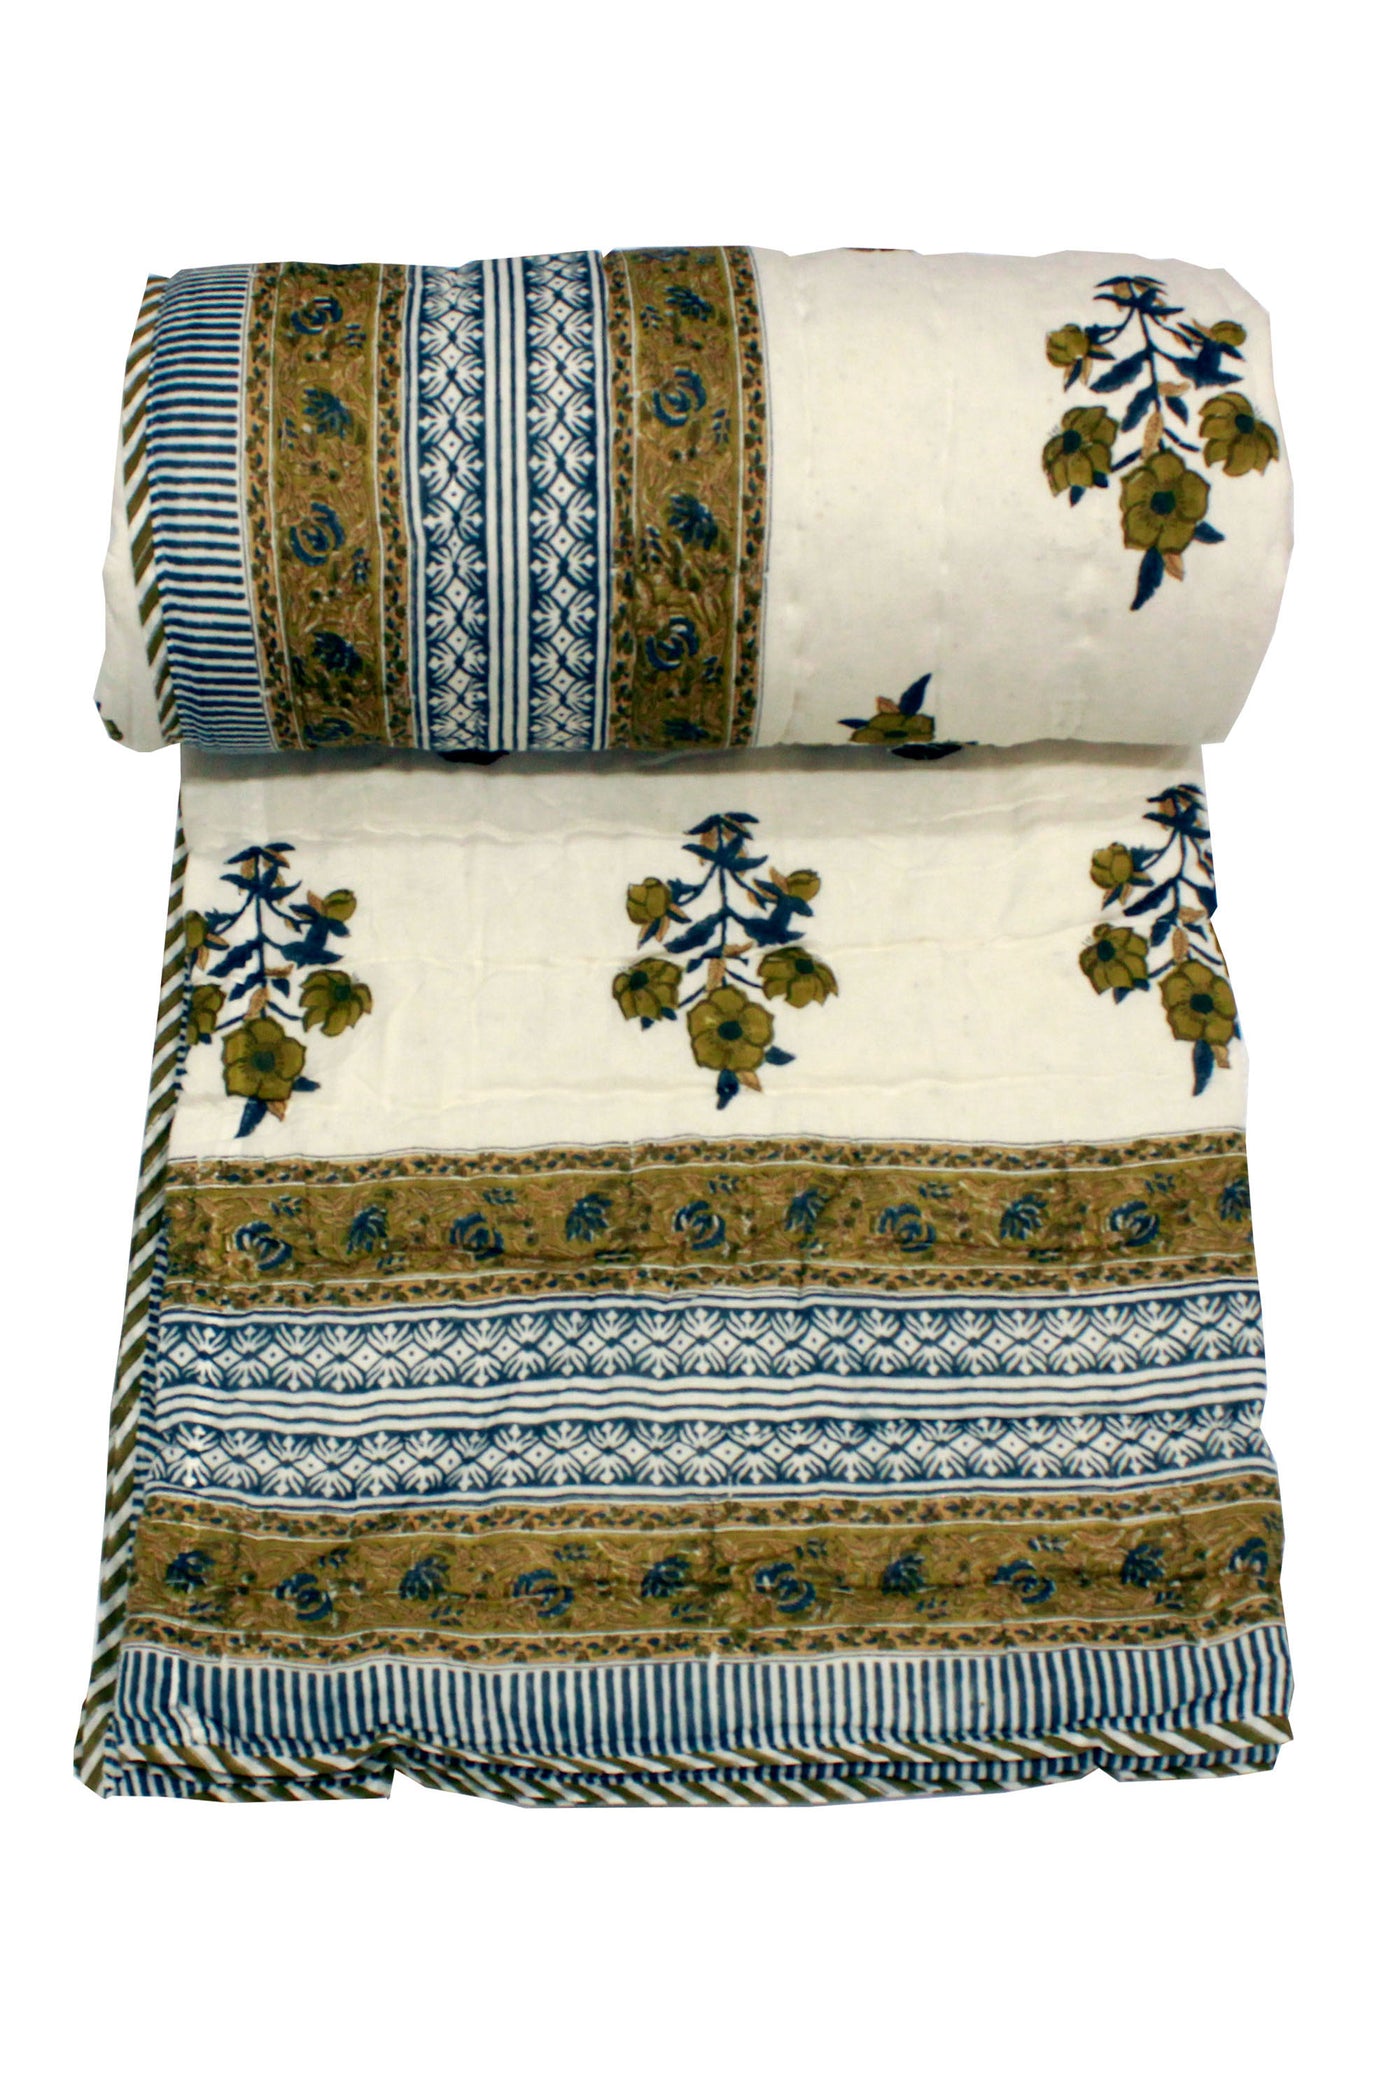 Quilt Mughal Buta Hand Block Print in Olive Green